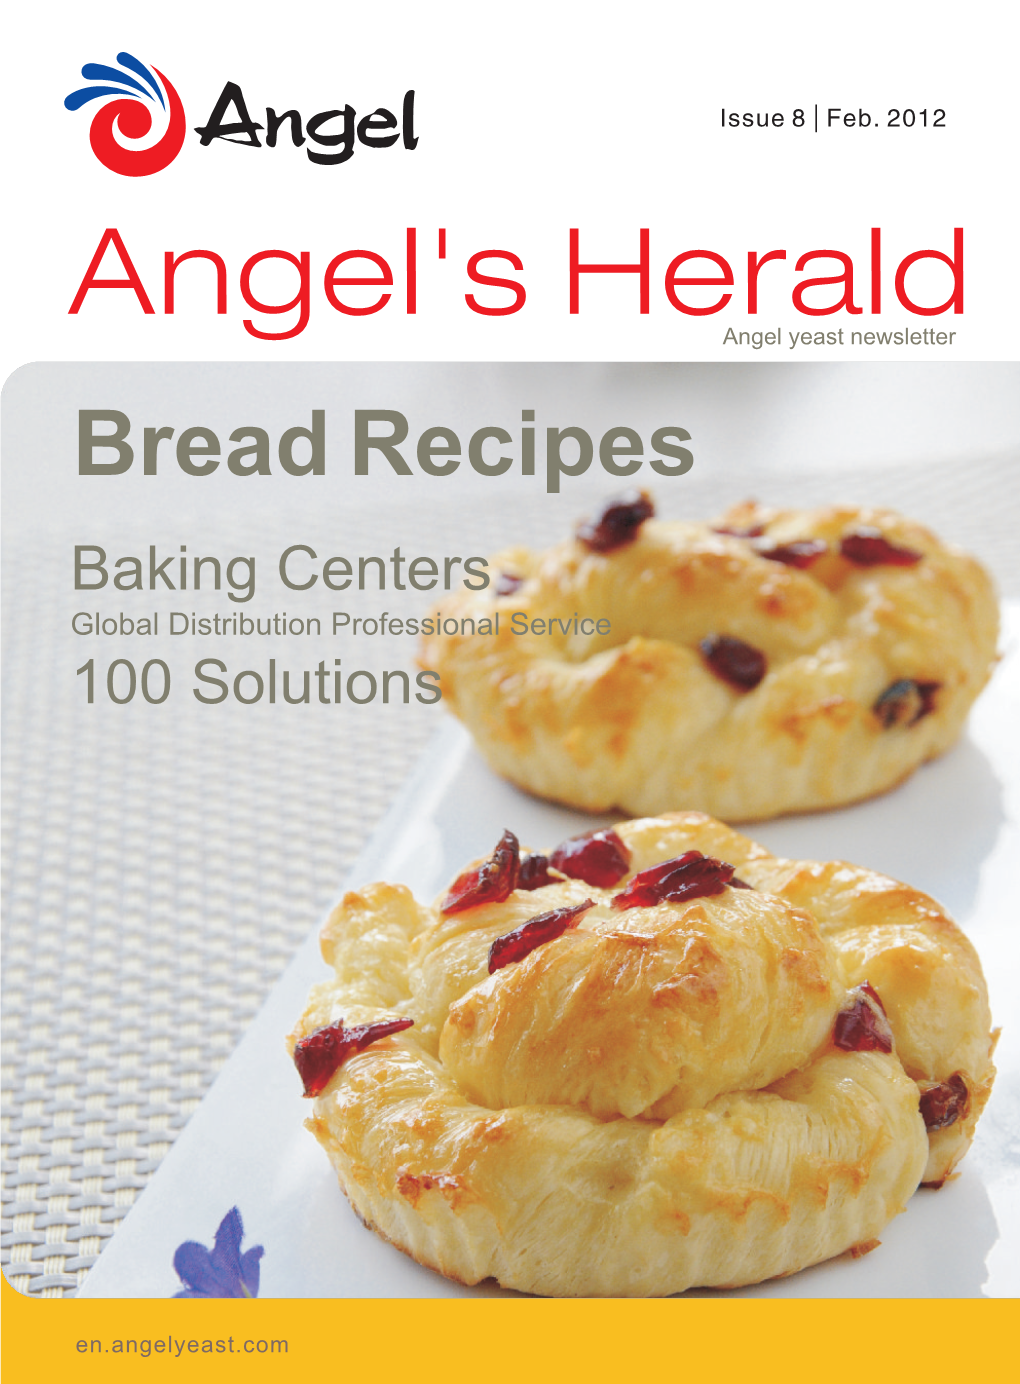 Bread Recipes Baking Centers Global Distribution Professional Service 100 Solutions